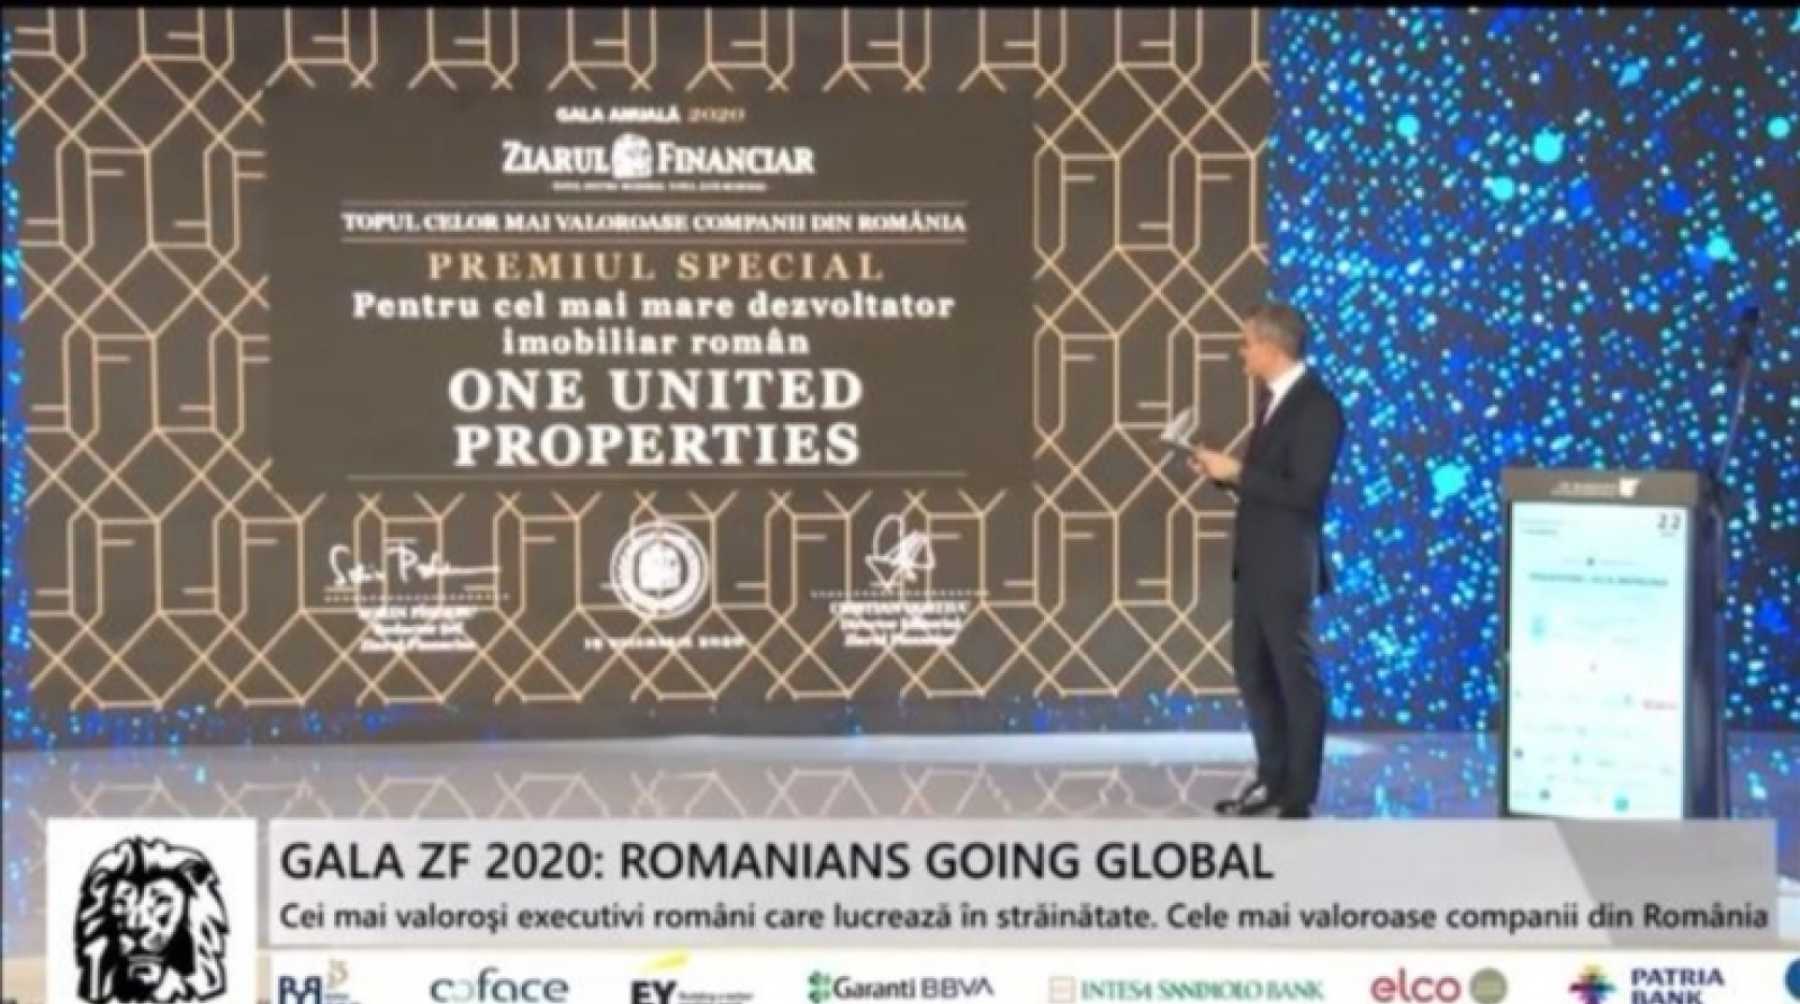 One United Properties awarded at ZF Gala – the leading real estate developer in Romania